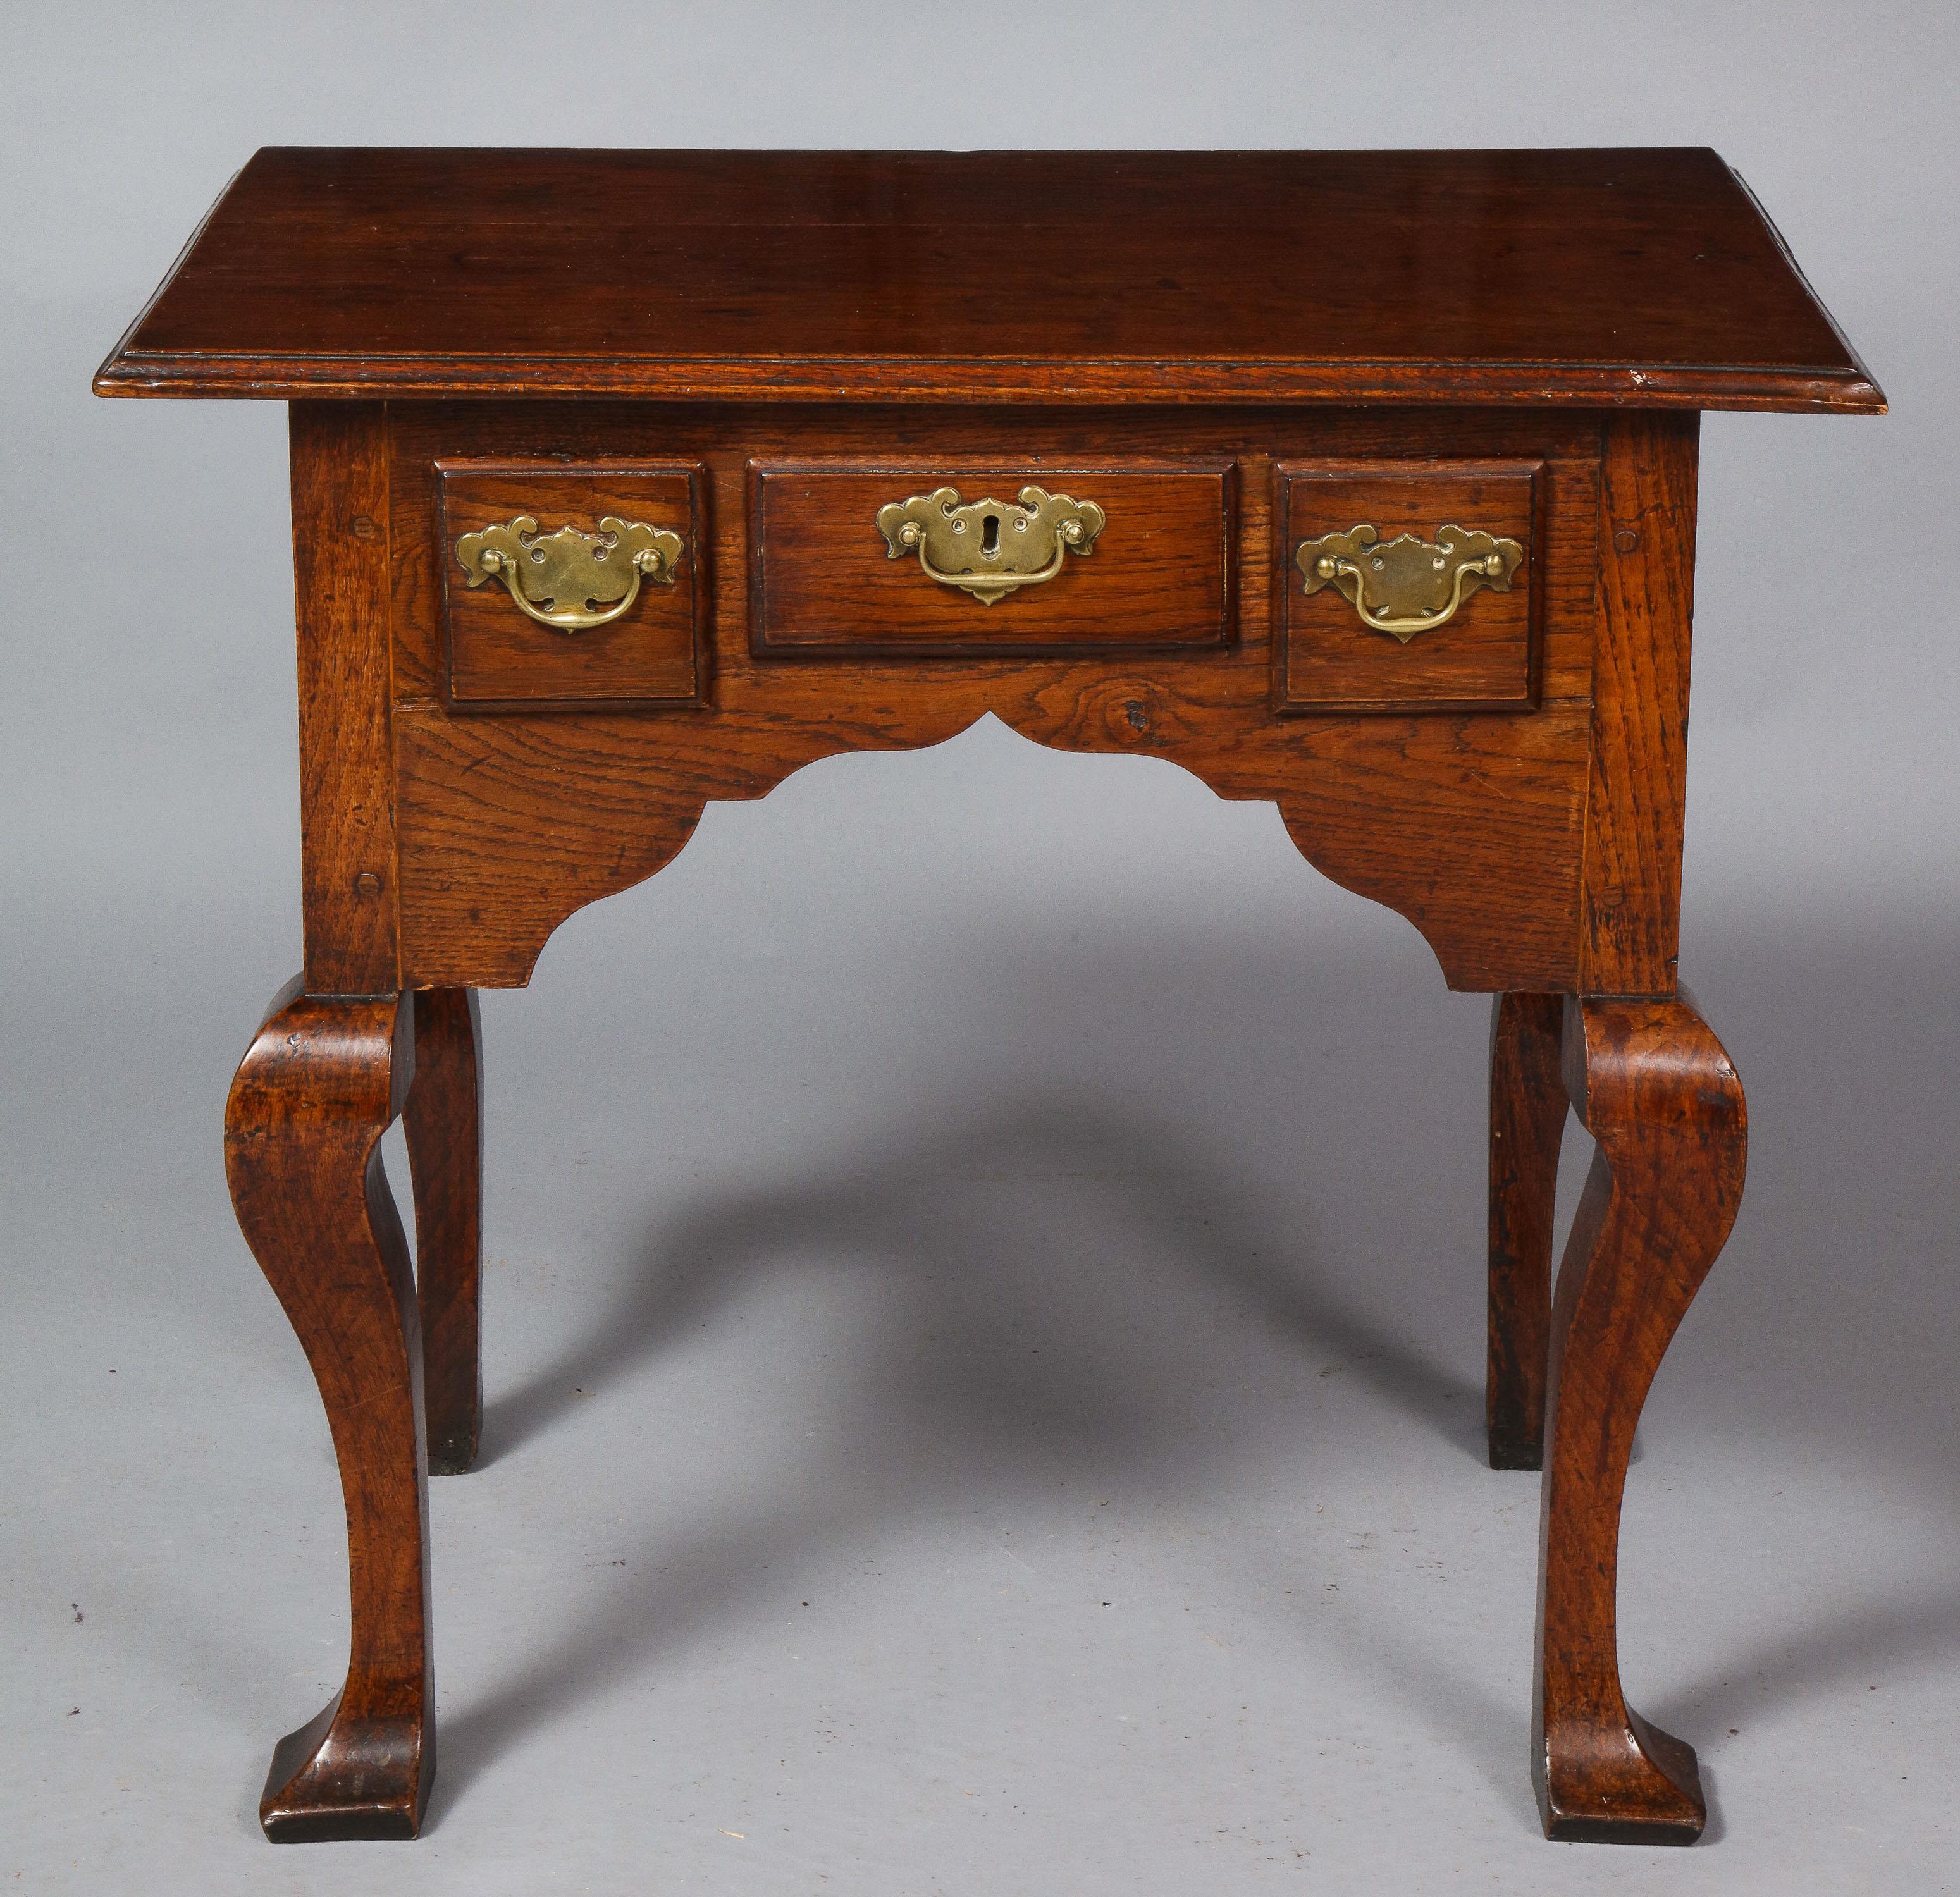 Very fine 18th century Welsh oak lowboy, the top with molded edge over two short and one wide drawers, all retaining original overscale hardware over richly scalloped apron and standing on square cut cabriole legs, the sides also with generous